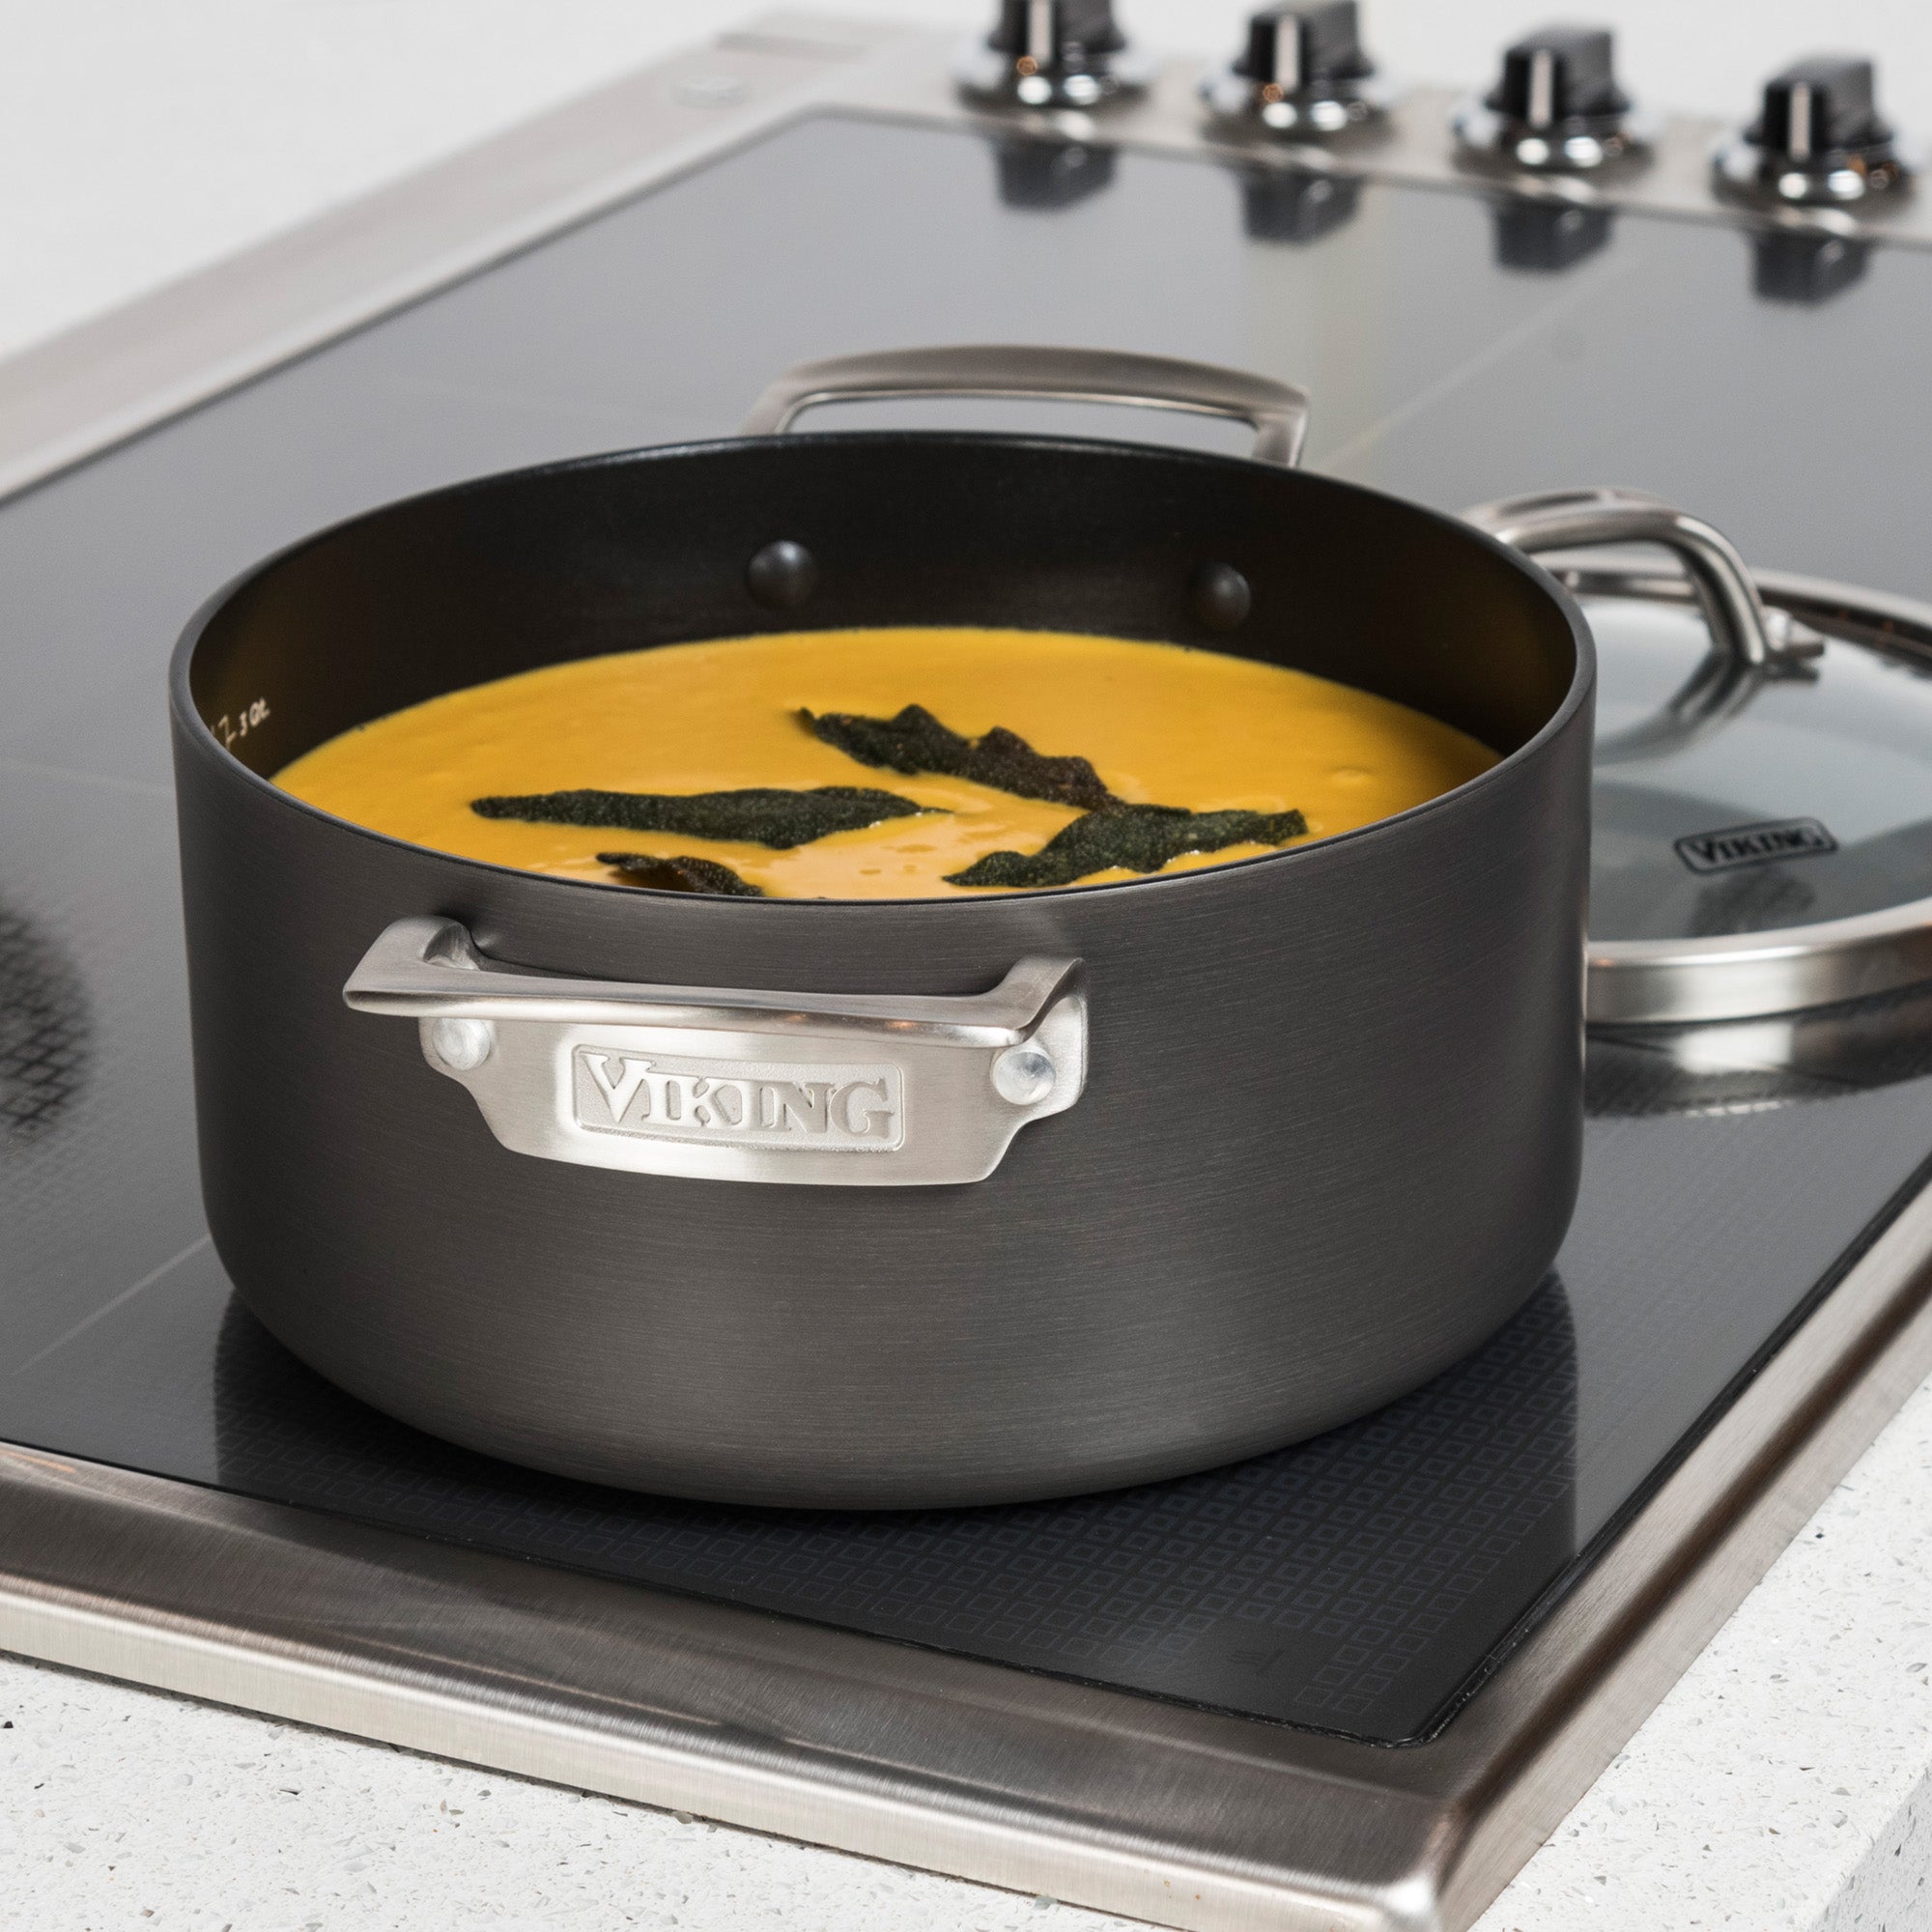 Signature™ Hard-Anodized Nonstick 5-Quart Dutch Oven with Cover